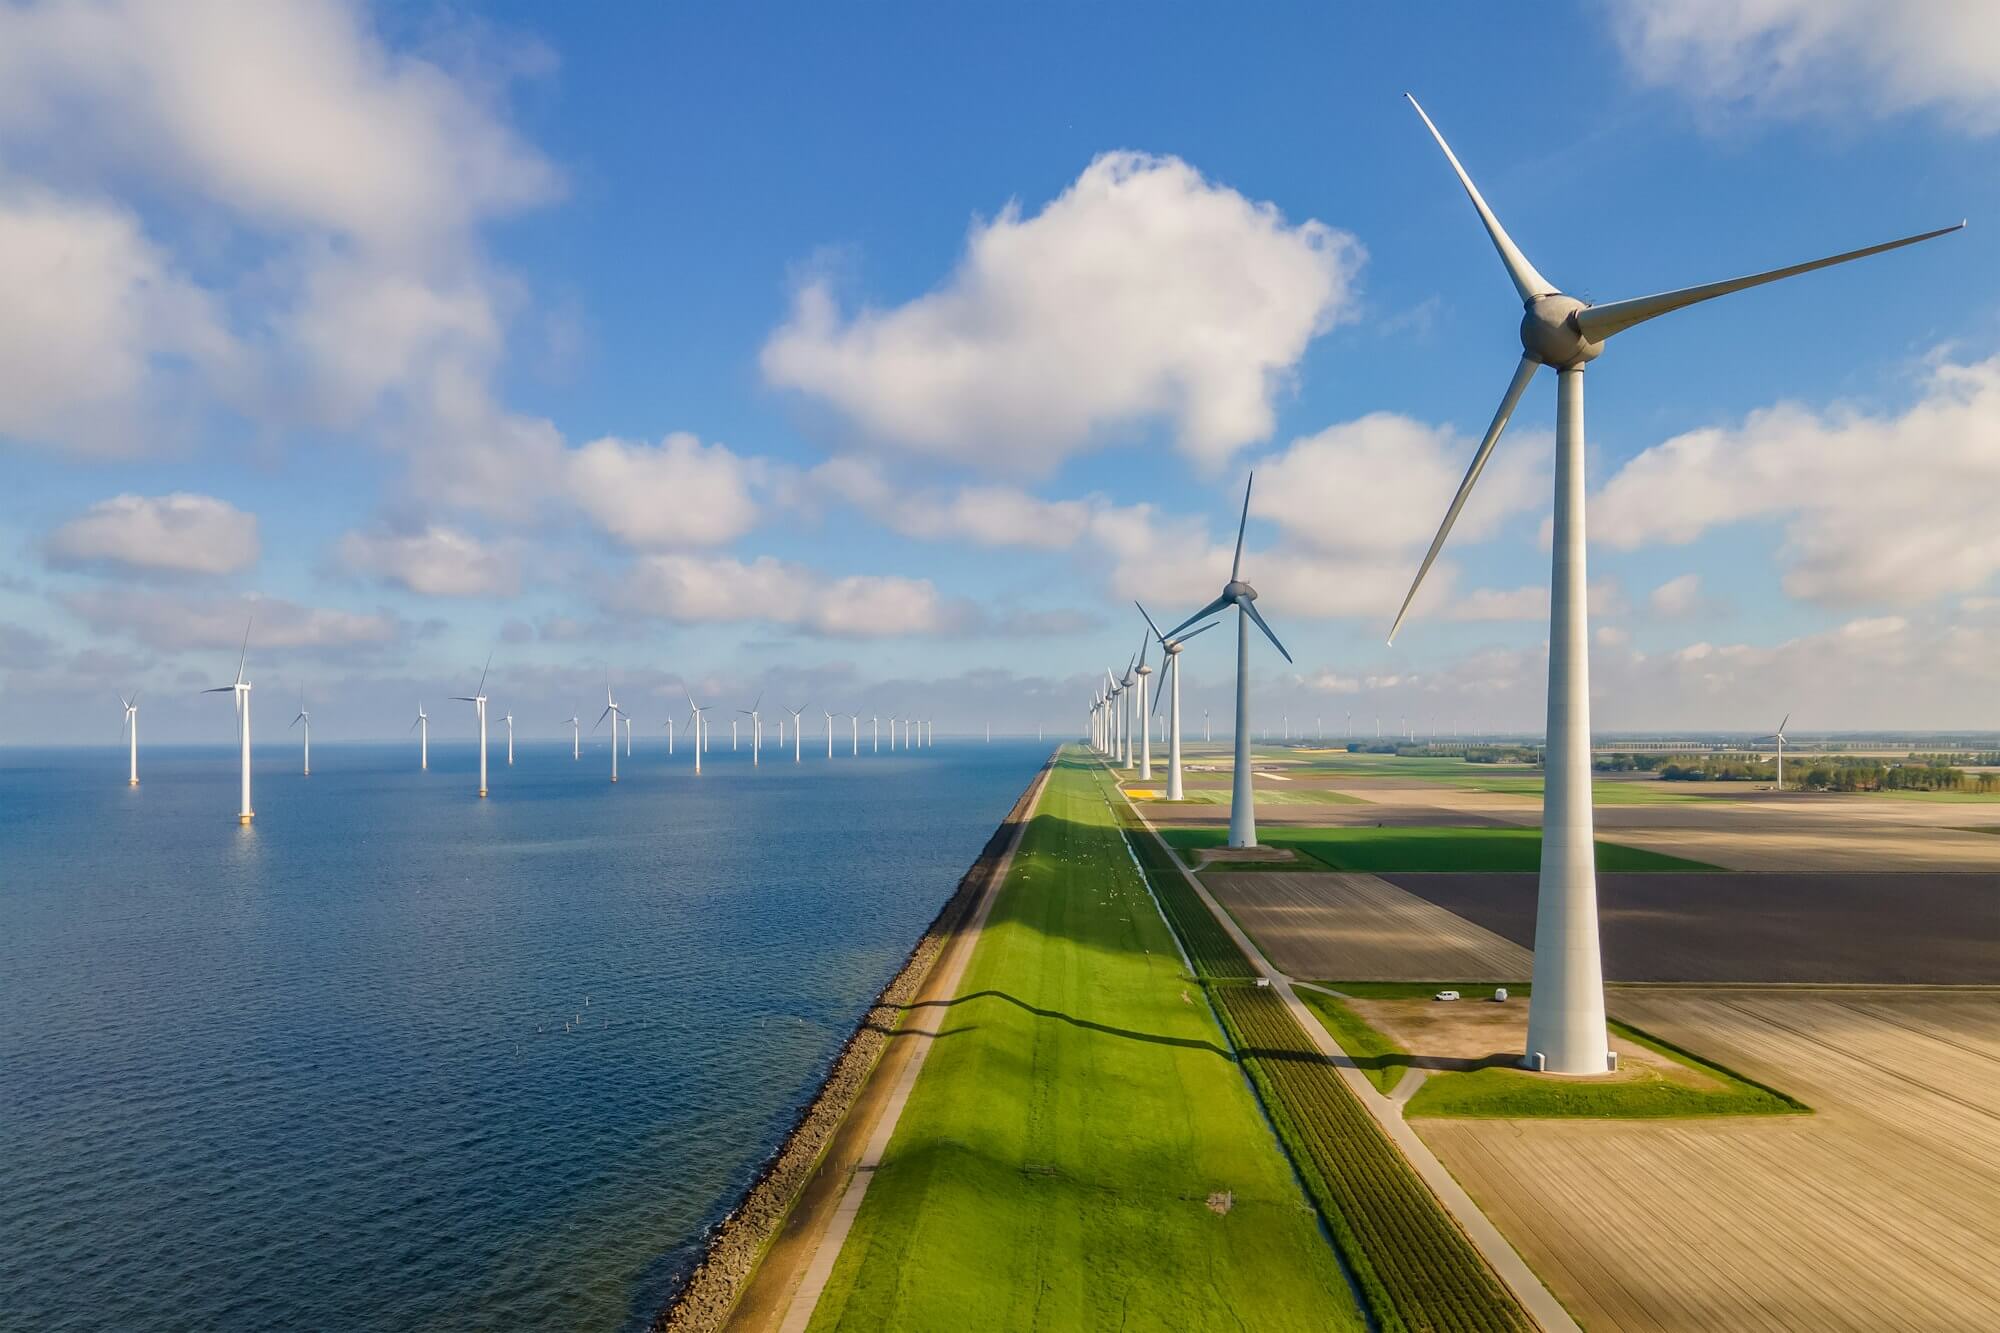 windmill-turbines-at-sea-generate-green-energy-in-the-netherlands.jpg